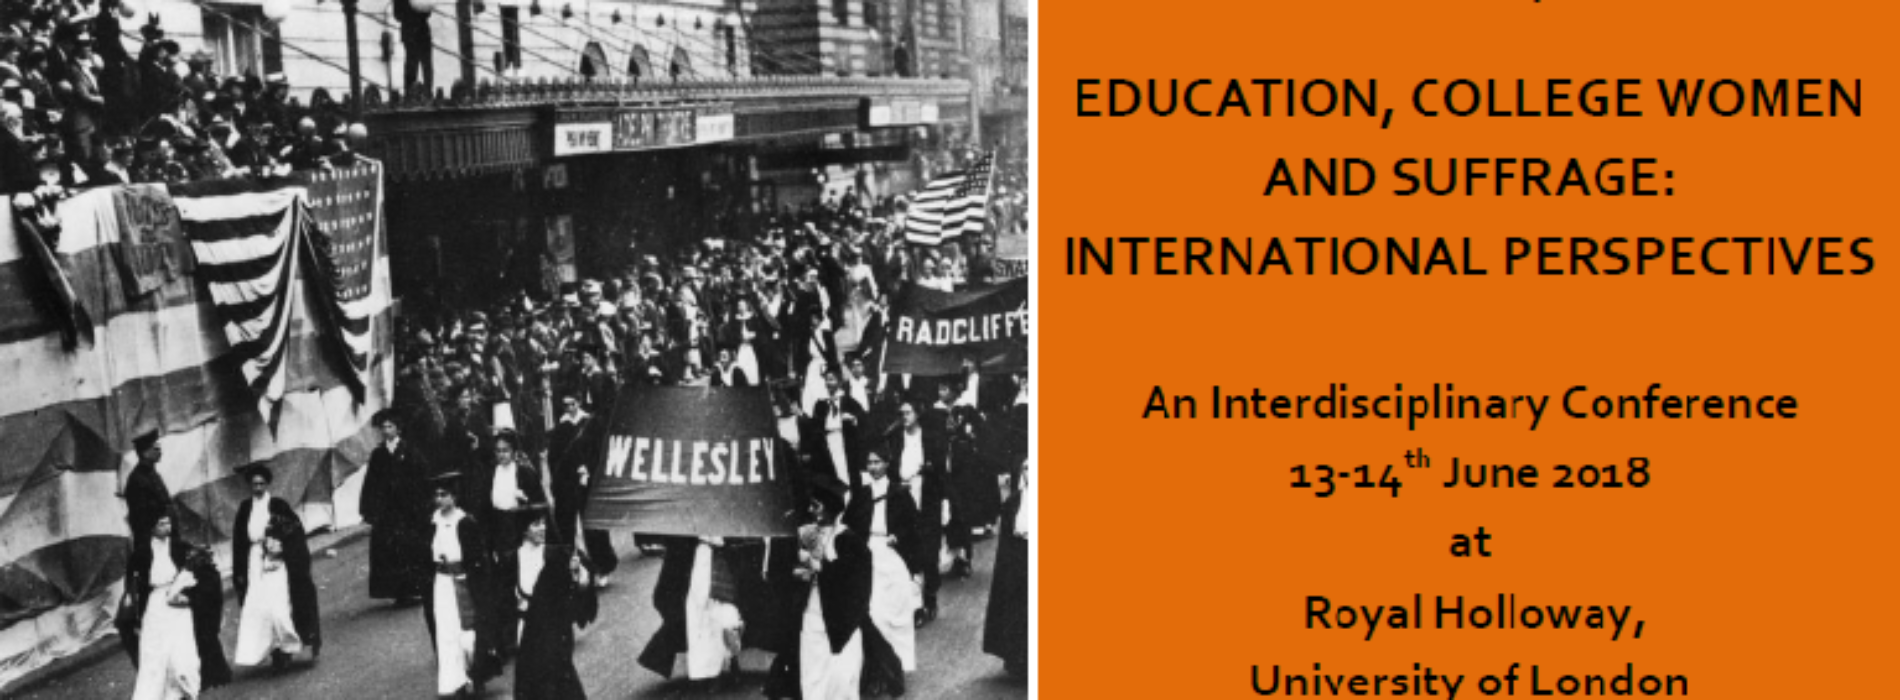 CFP: Education, College Women and Suffrage. 13-14th June 2018 at Royal Holloway. Deadline: Nov. 13 2017